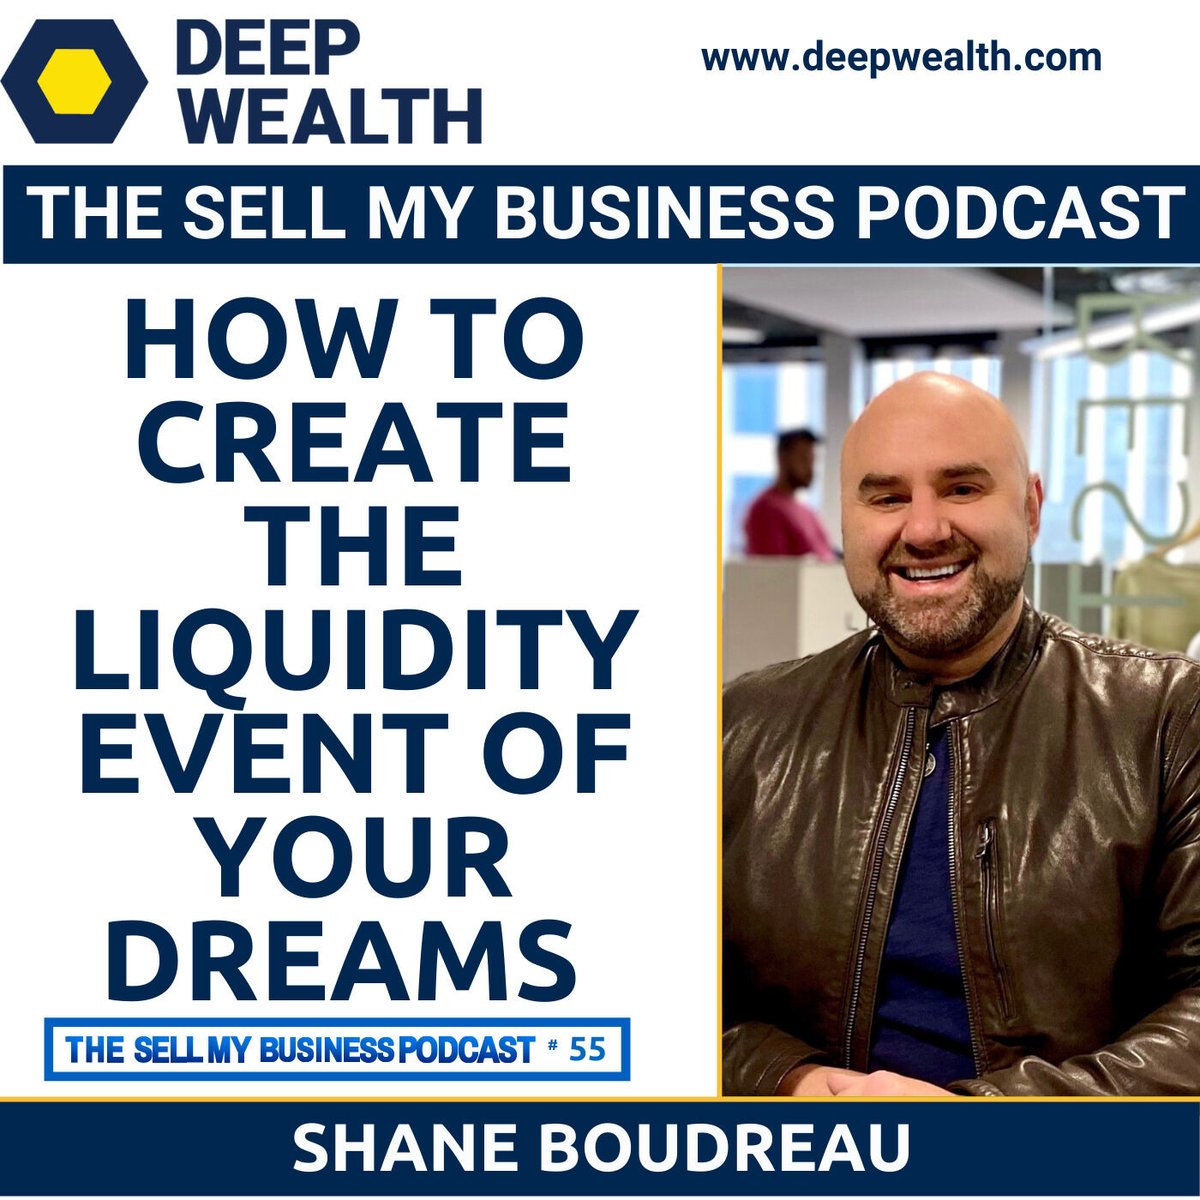 Successful Entrepreneur And Investor Shane Boudreau On How To Create The Liquidity Event Of Your Dreams (#55) iapdw.com/2o5 #DeepWealth #BusinessSuccess